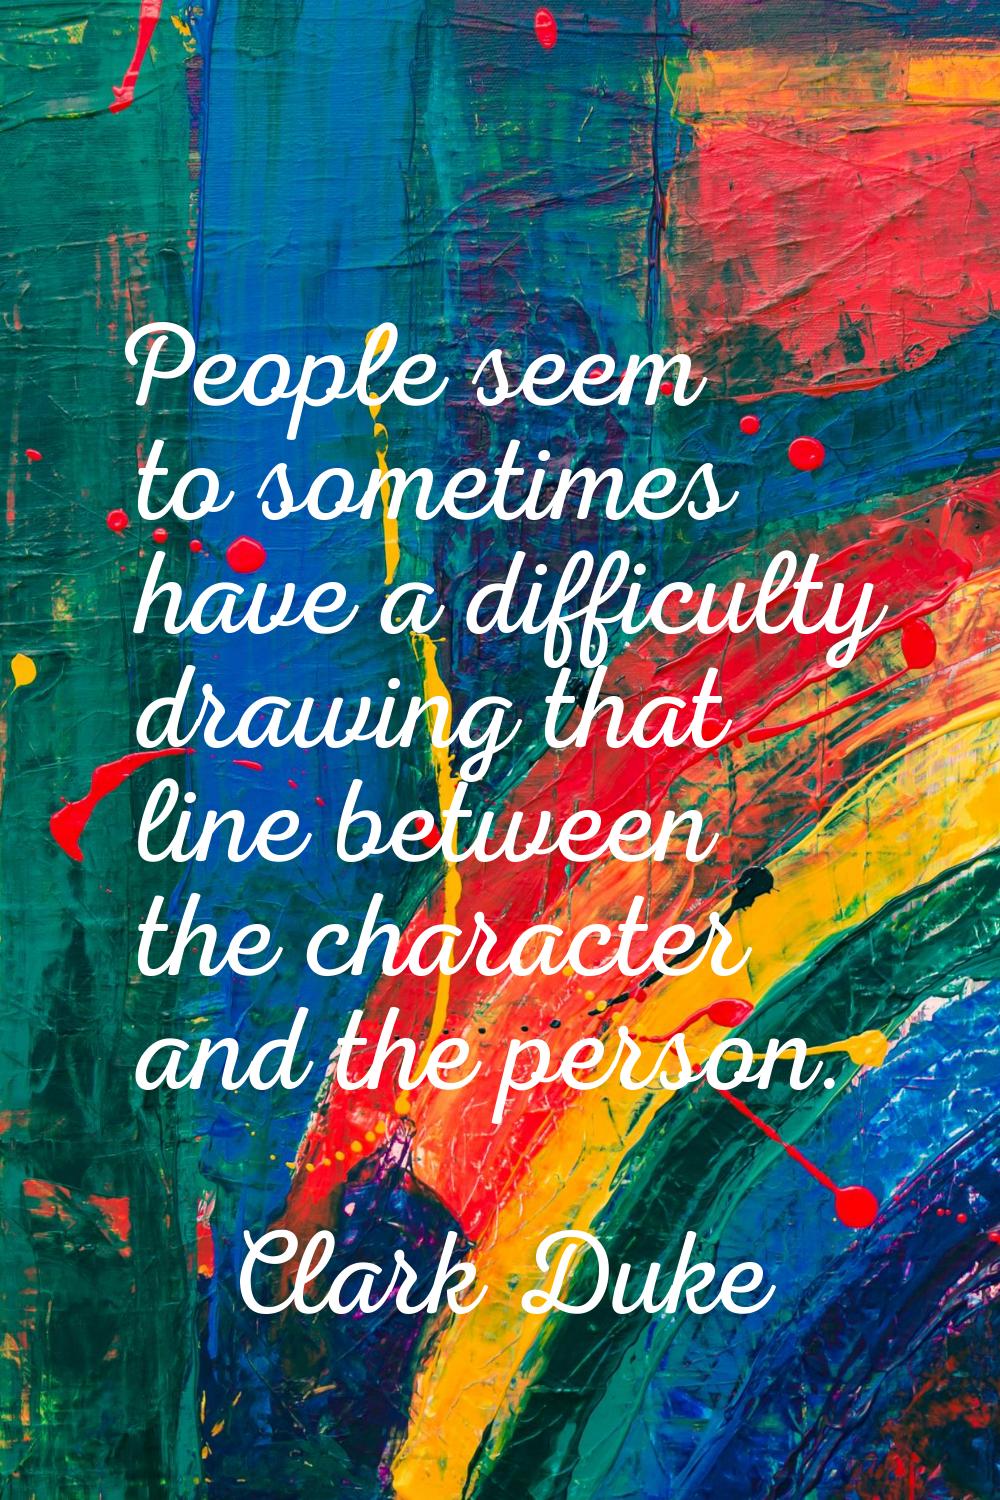 People seem to sometimes have a difficulty drawing that line between the character and the person.